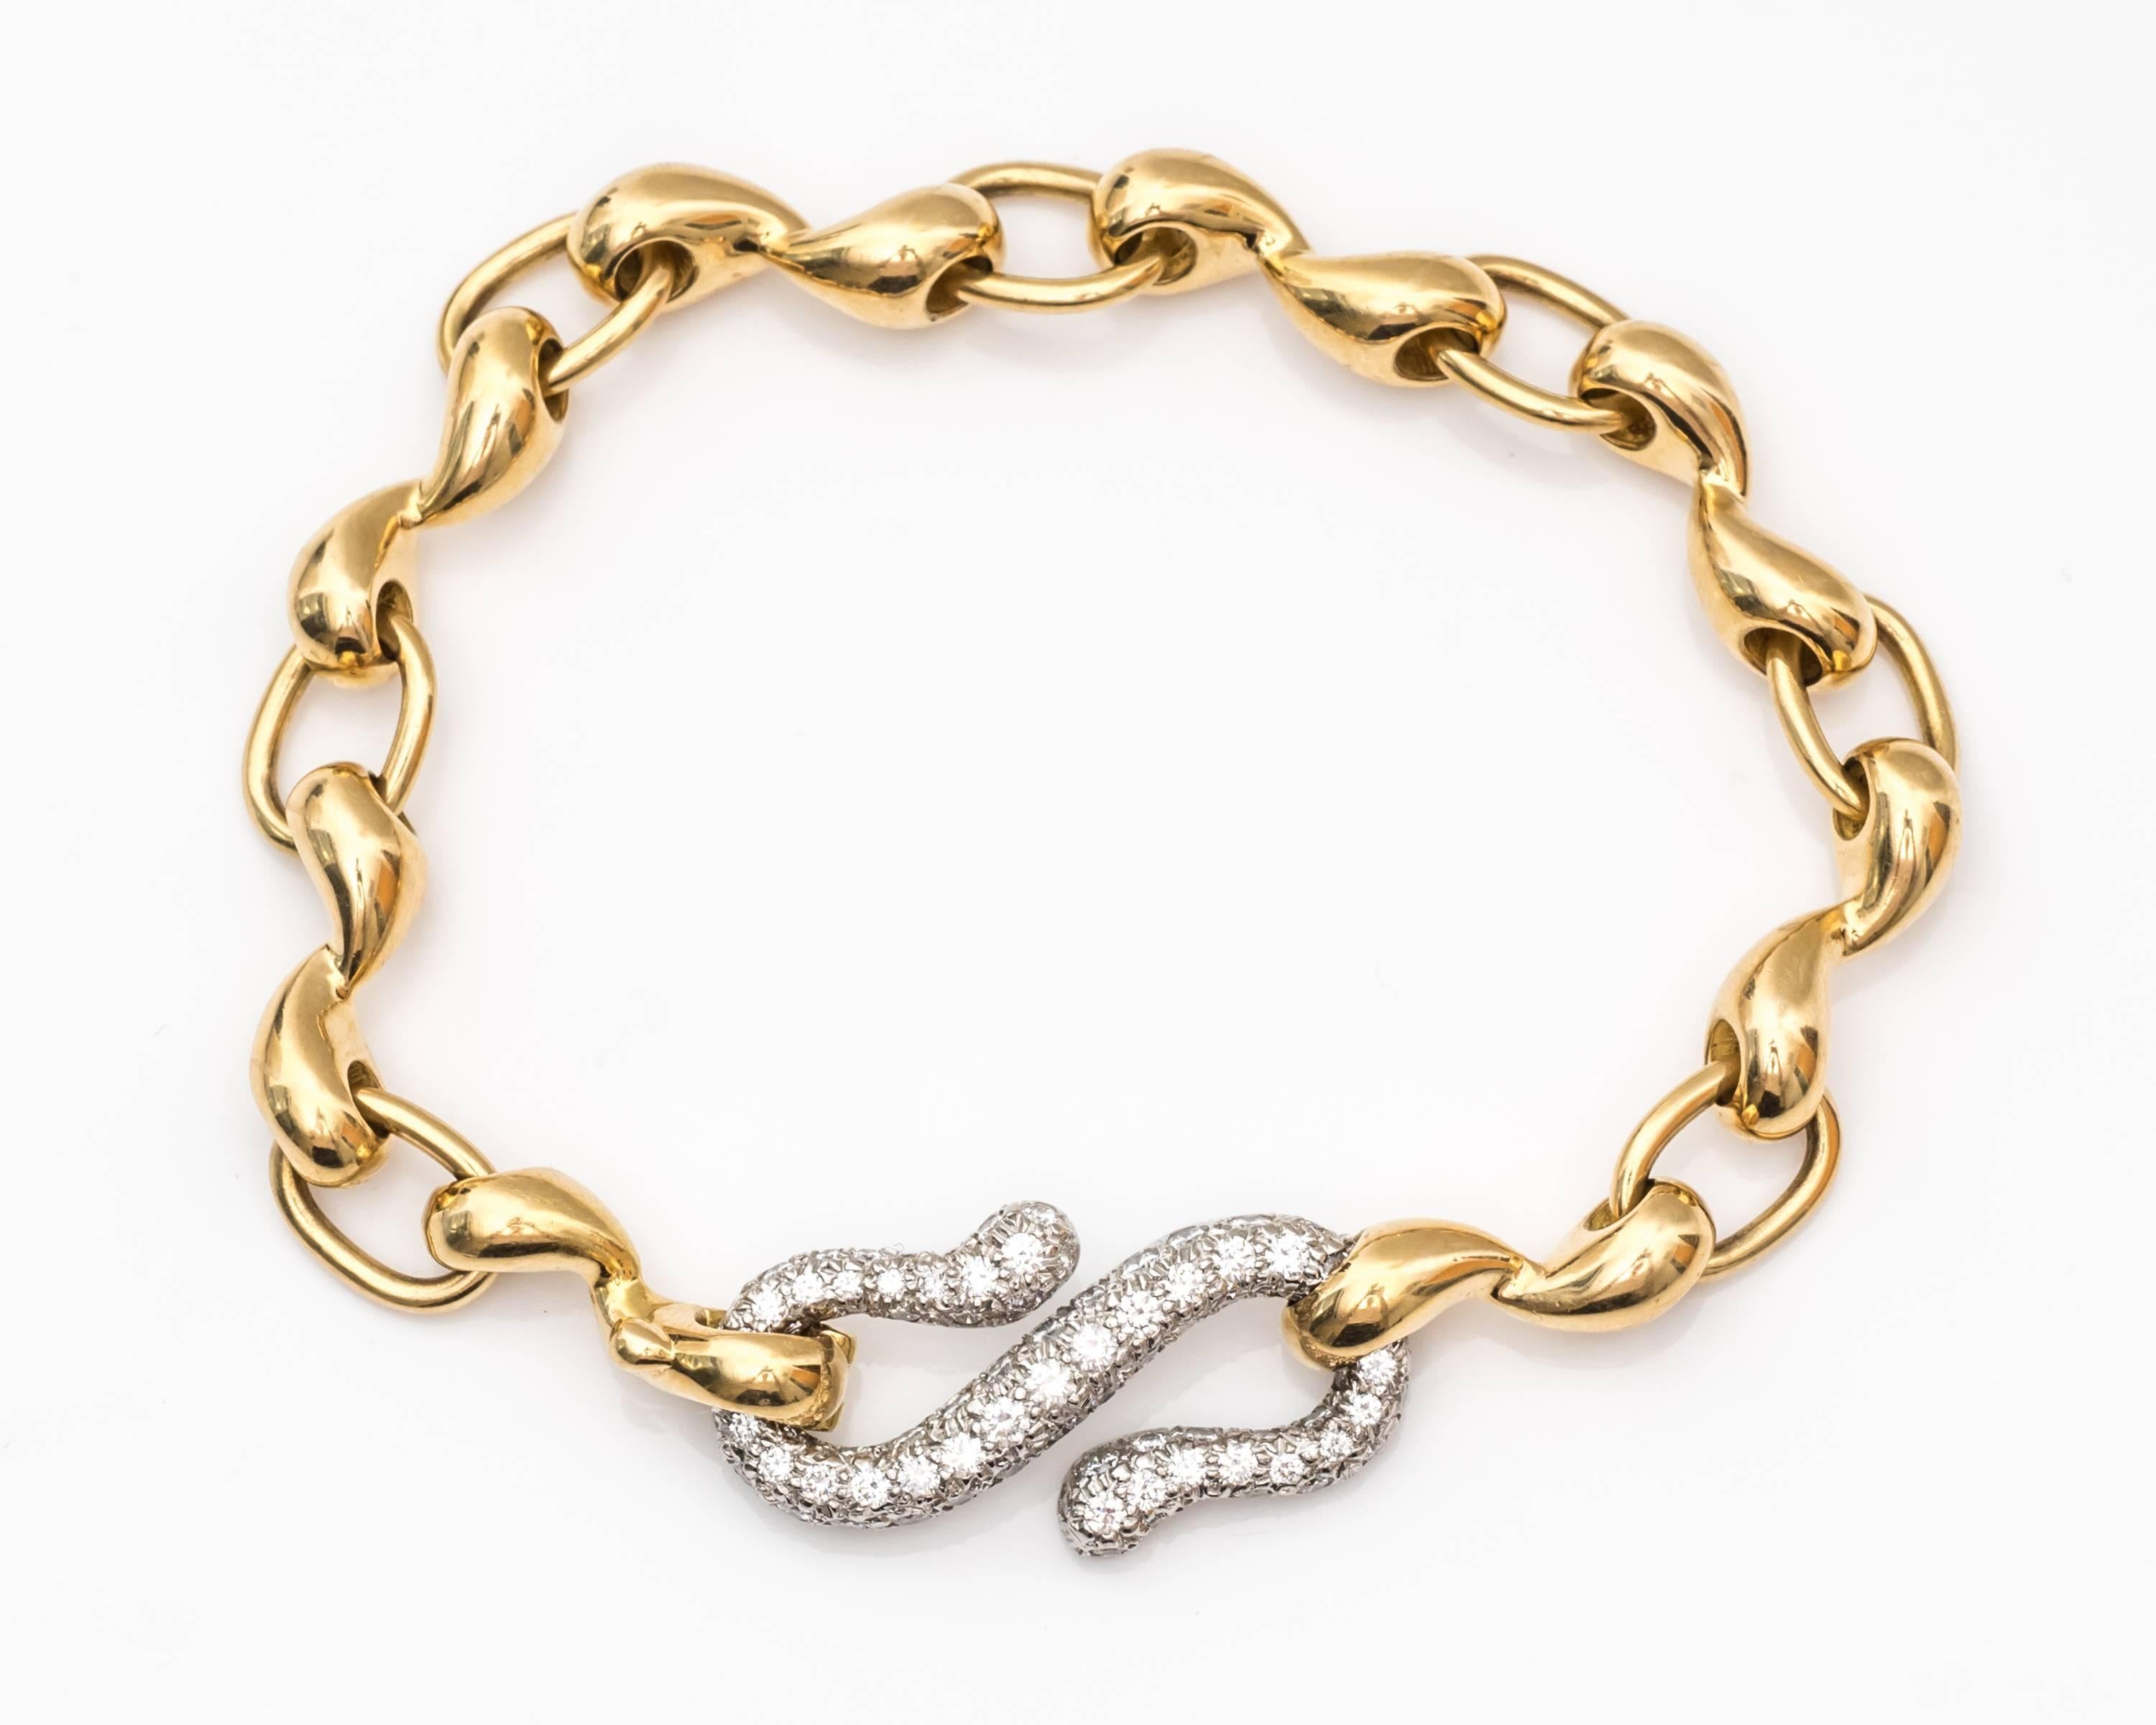 Tiffany & Co. Platinum and 18 Karat Gold Bracelet
"S" Link - Extra Large embellished in Diamonds, Pave Set
F color, VS clarity Diamonds, 2 Carats Total Weight
7 Inch Bracelet
Lock Mechanism/Clasp attached to "S" link